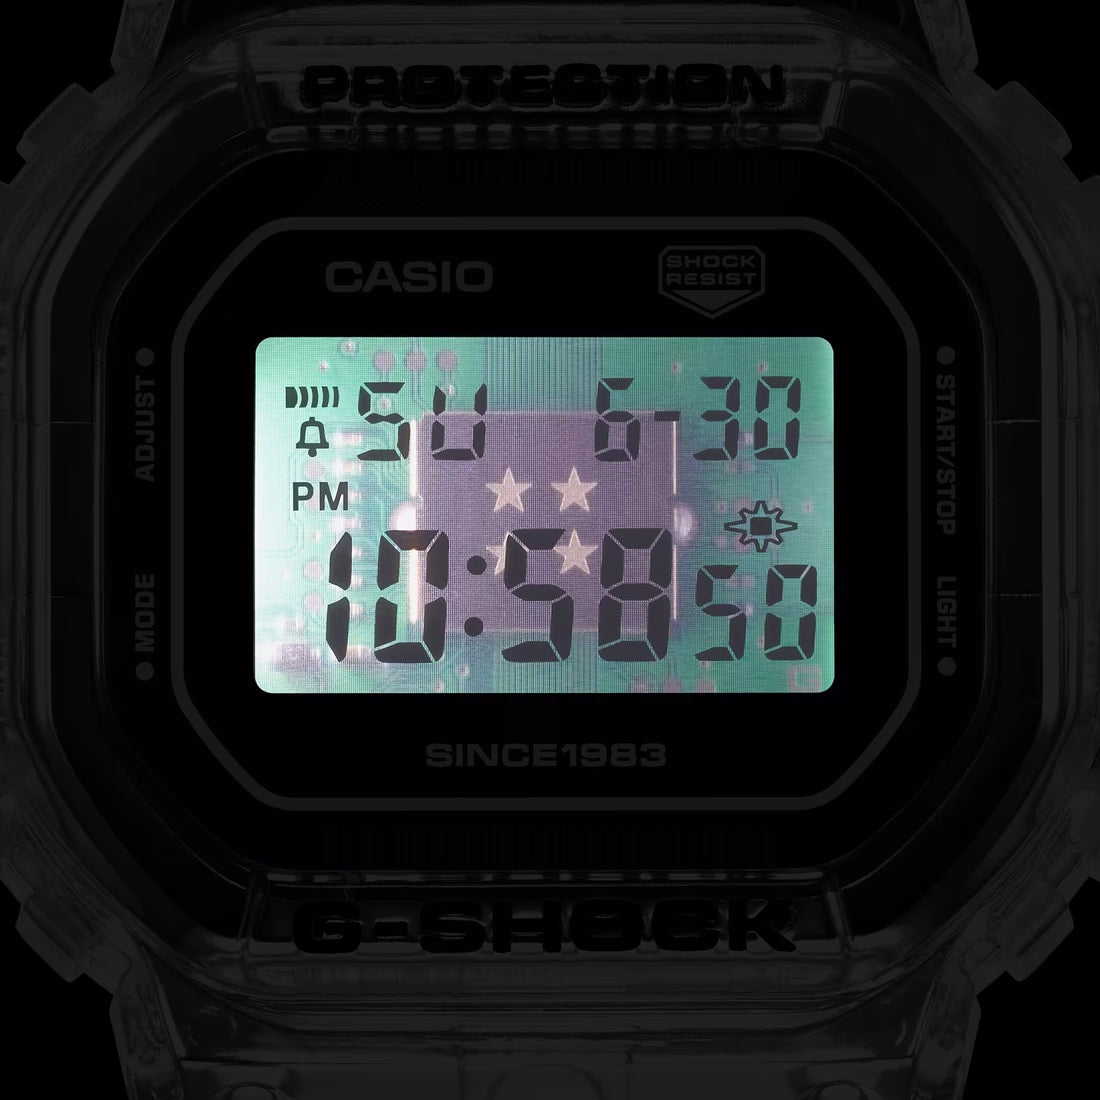 Orologio G-Shock DW-5040RX-7ER Clear Remix limited edition 40th